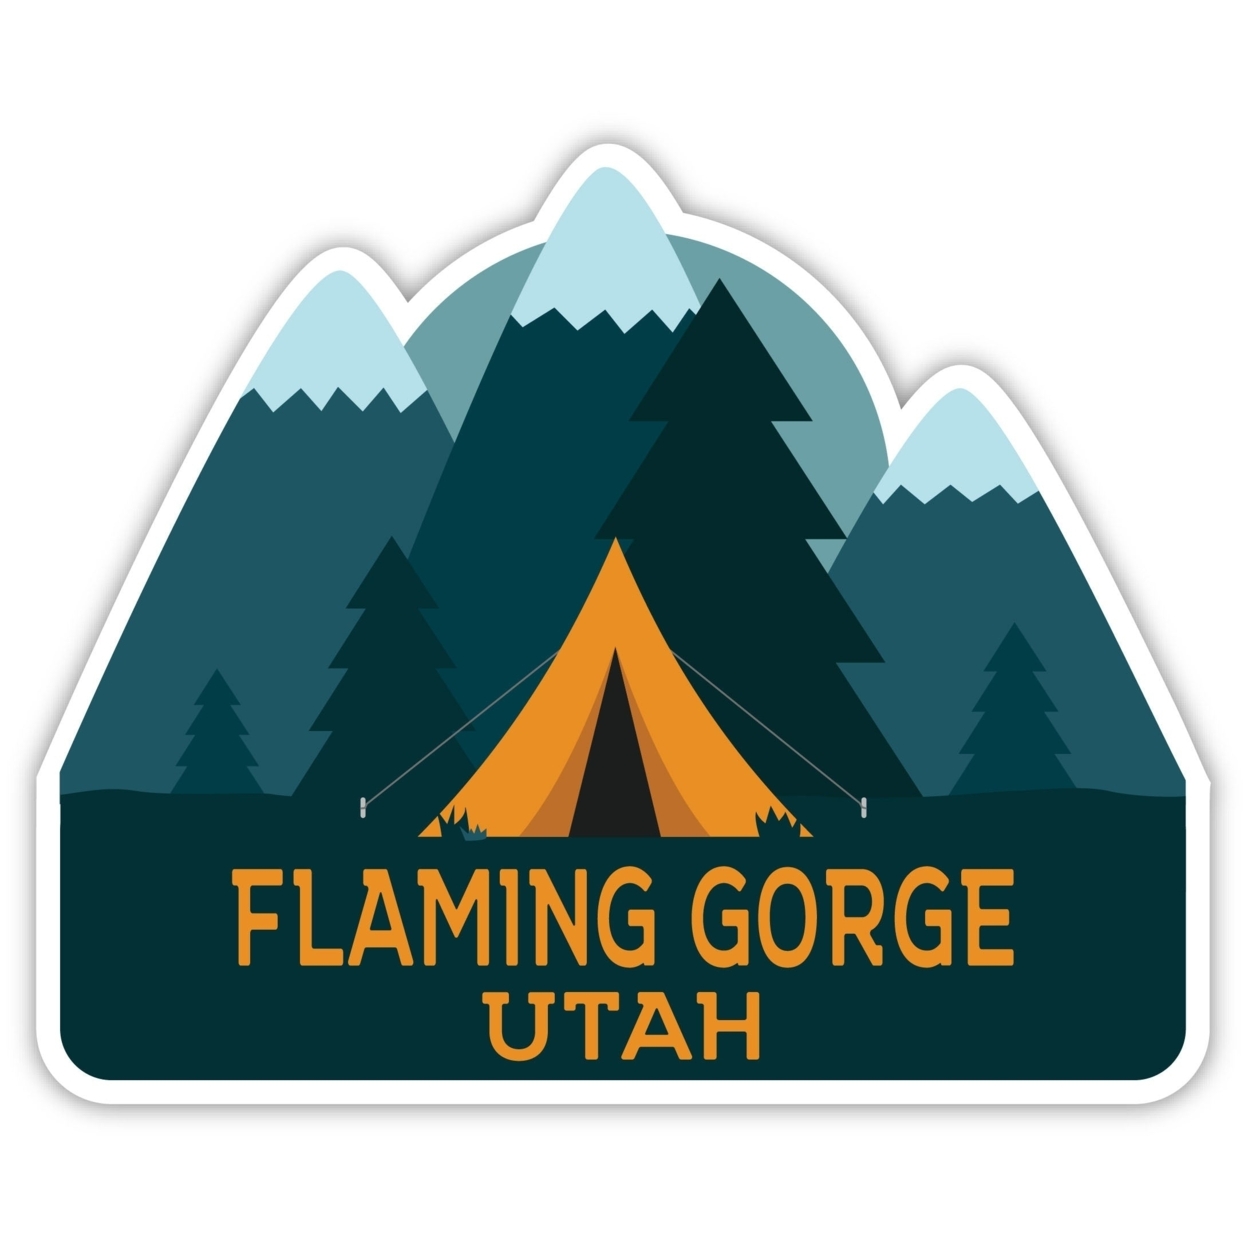 Flaming Gorge Utah Souvenir Decorative Stickers (Choose Theme And Size) - 4-Pack, 2-Inch, Adventures Awaits